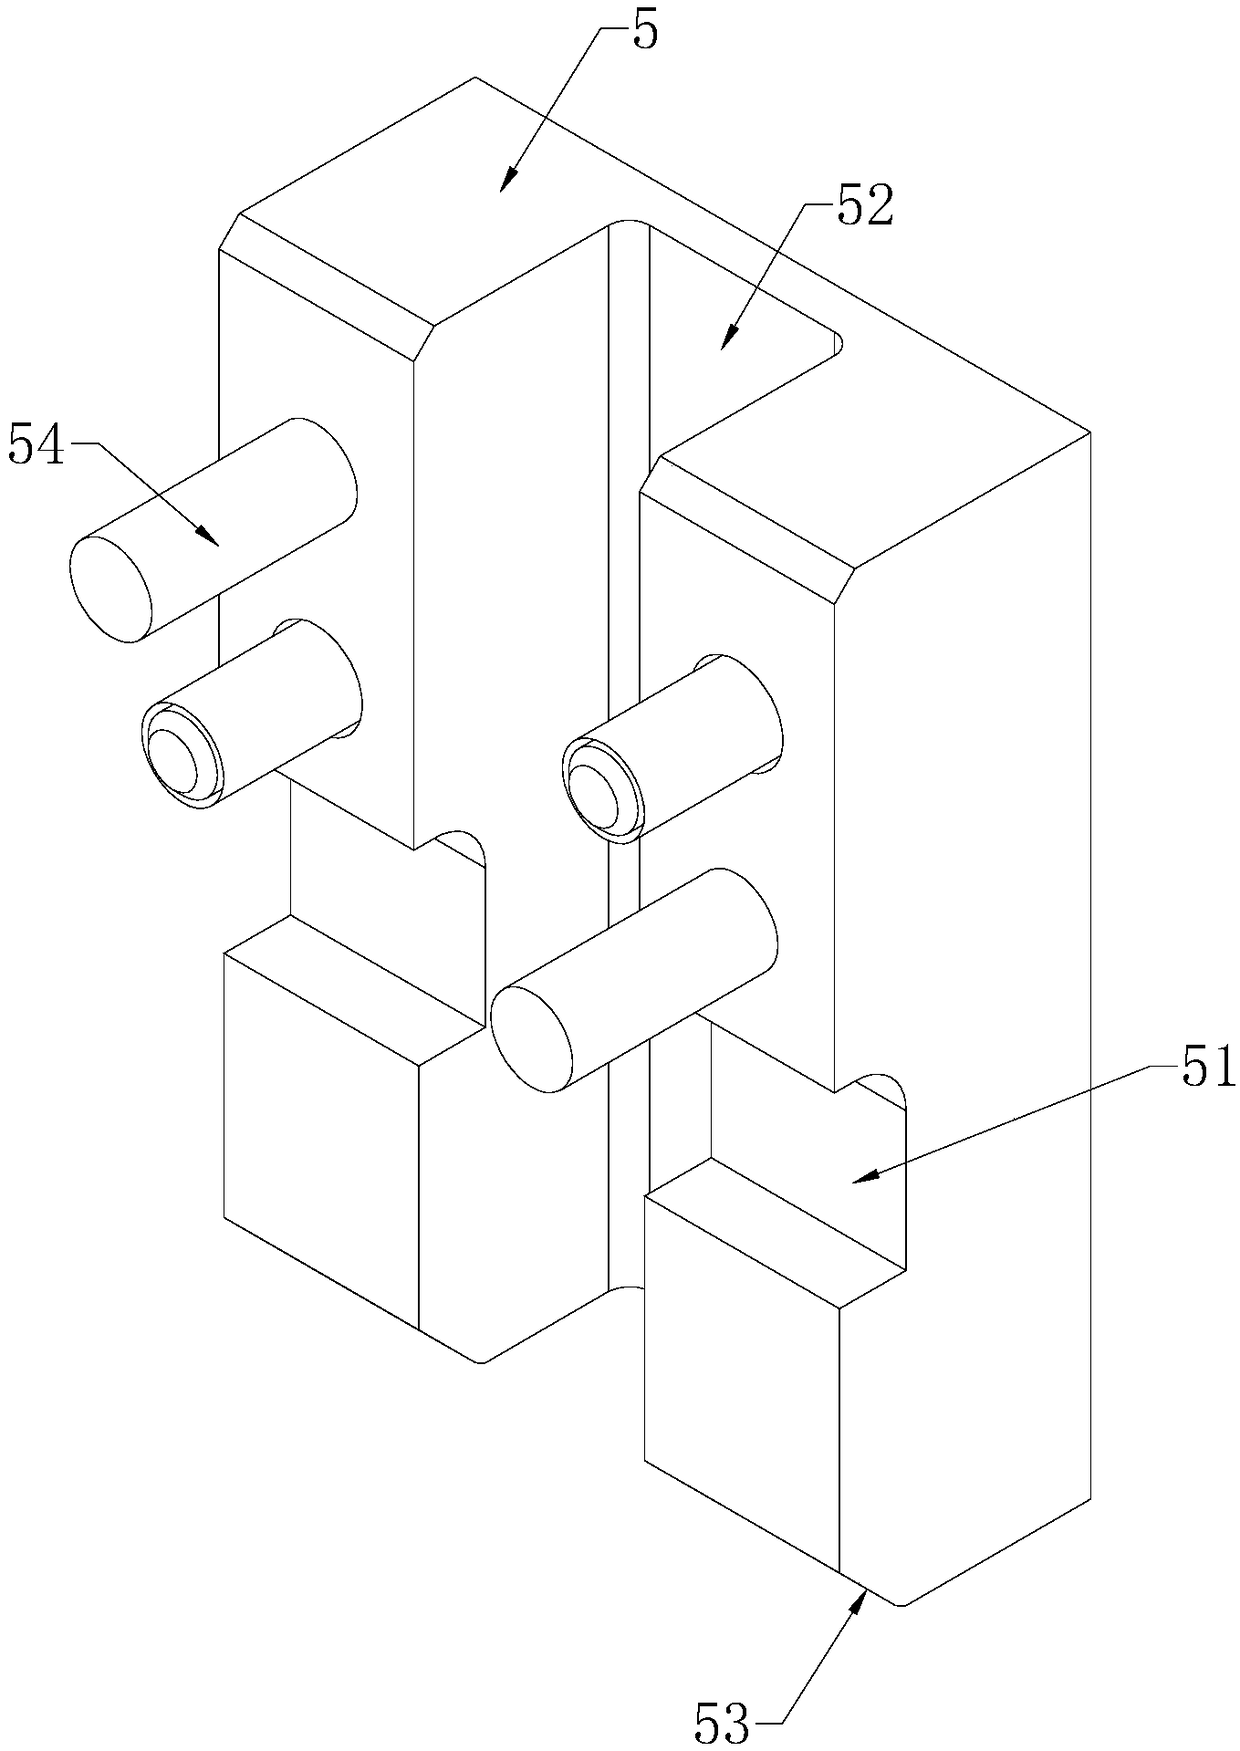 Secondary ejection mechanism and mold adopting same